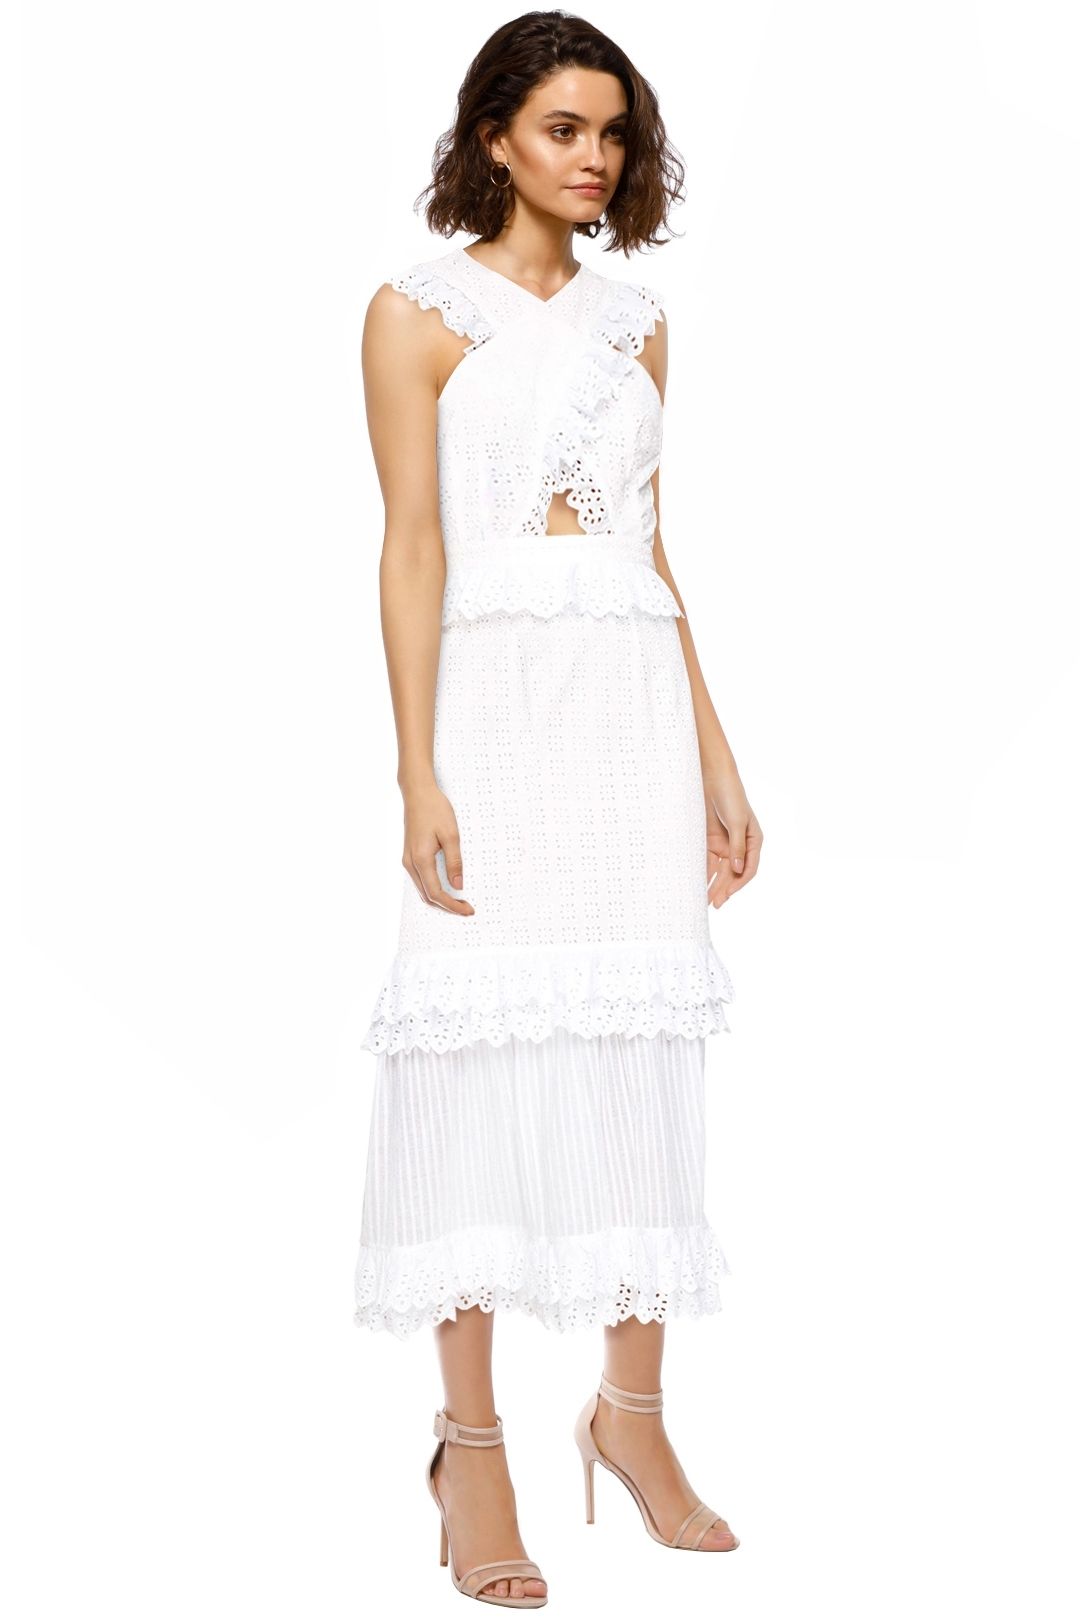 Alice McCall - Everything She Wants Dress - Porcelain White - Side